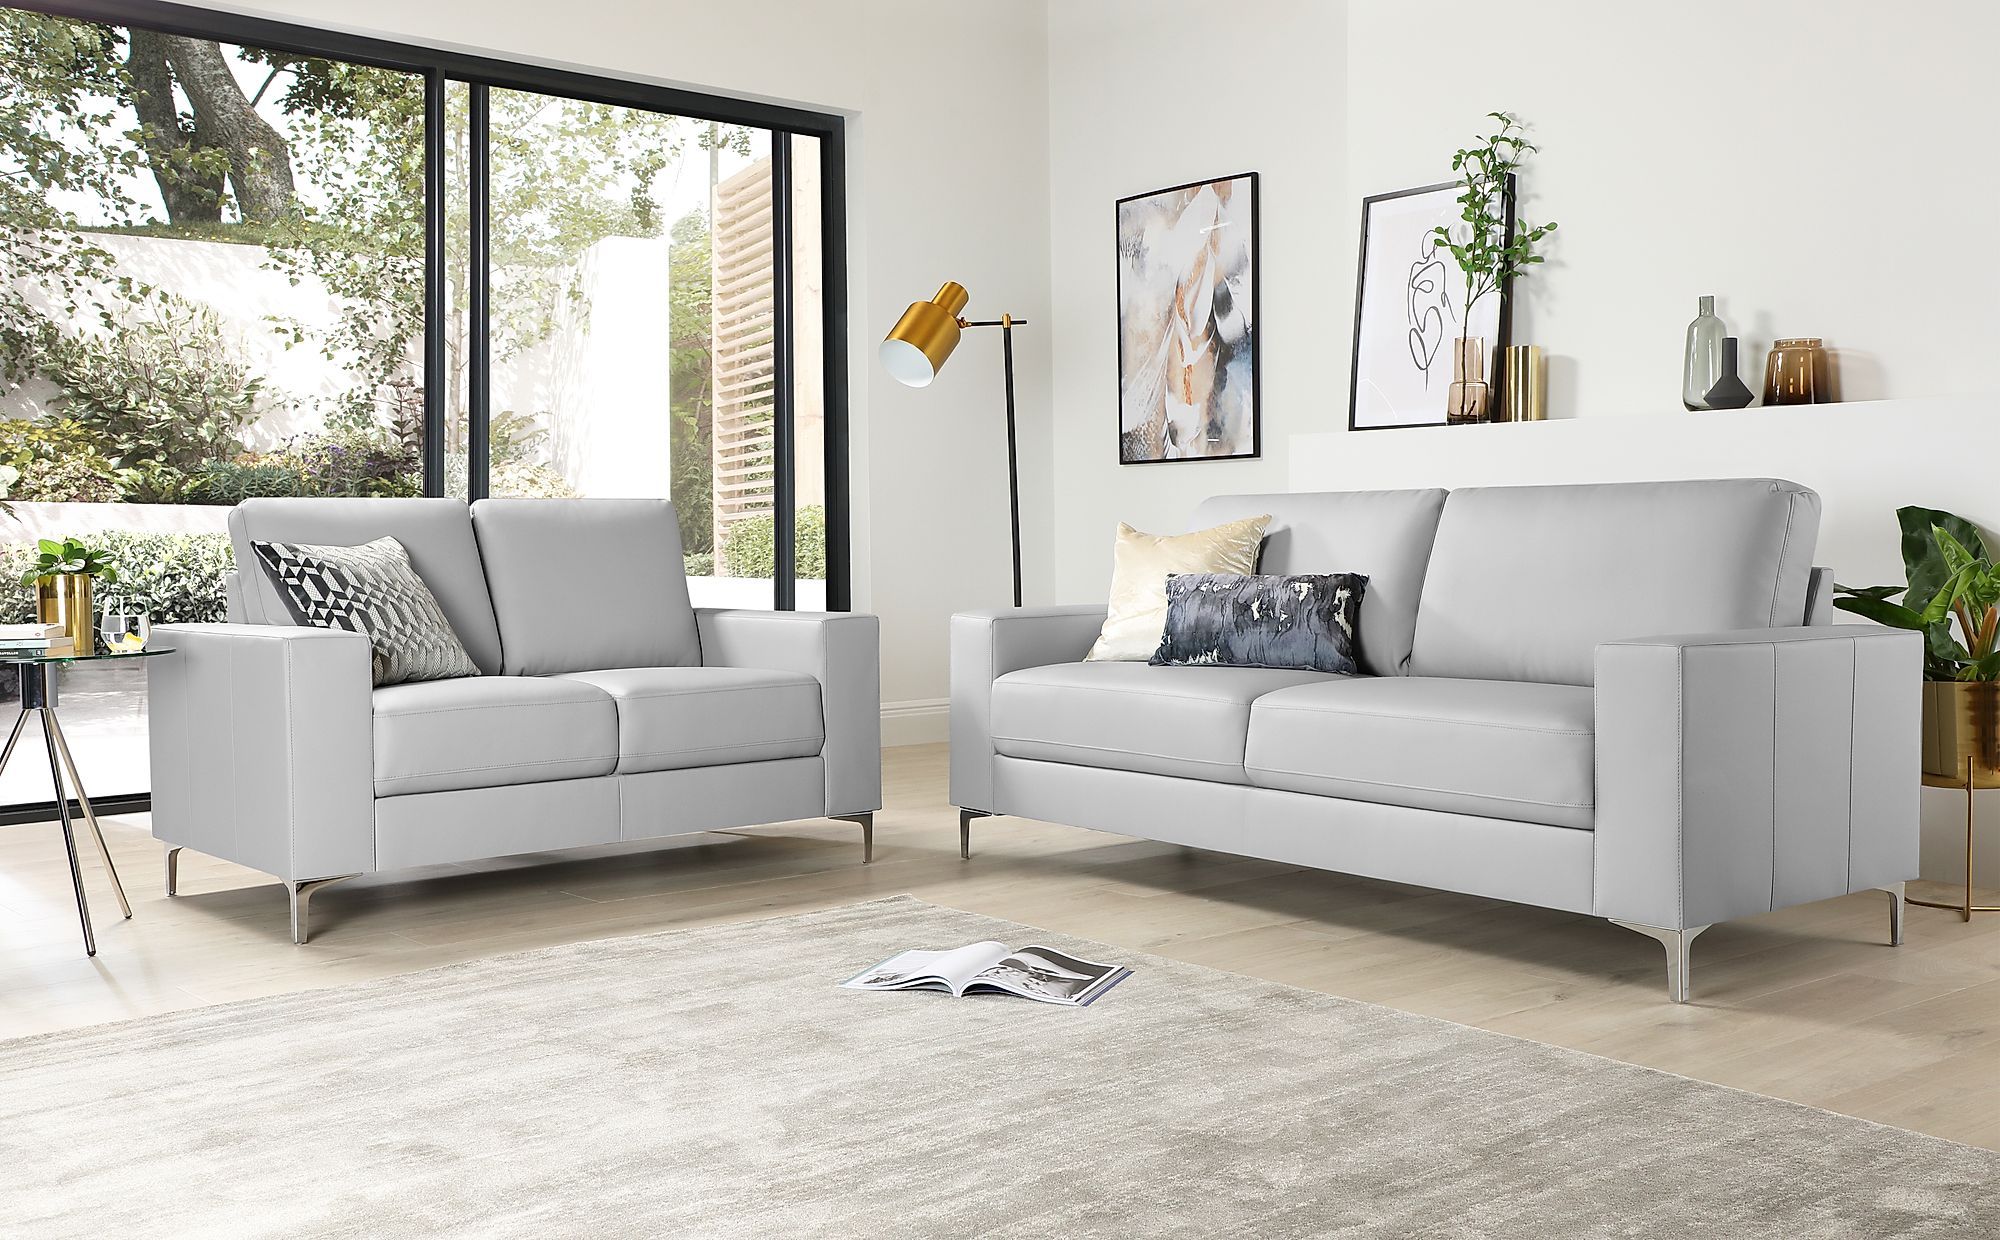 Baltimore Light Grey Leather 3+2 Seater Sofa Set | Furniture Choice Intended For Modern Light Grey Loveseat Sofas (View 7 of 20)